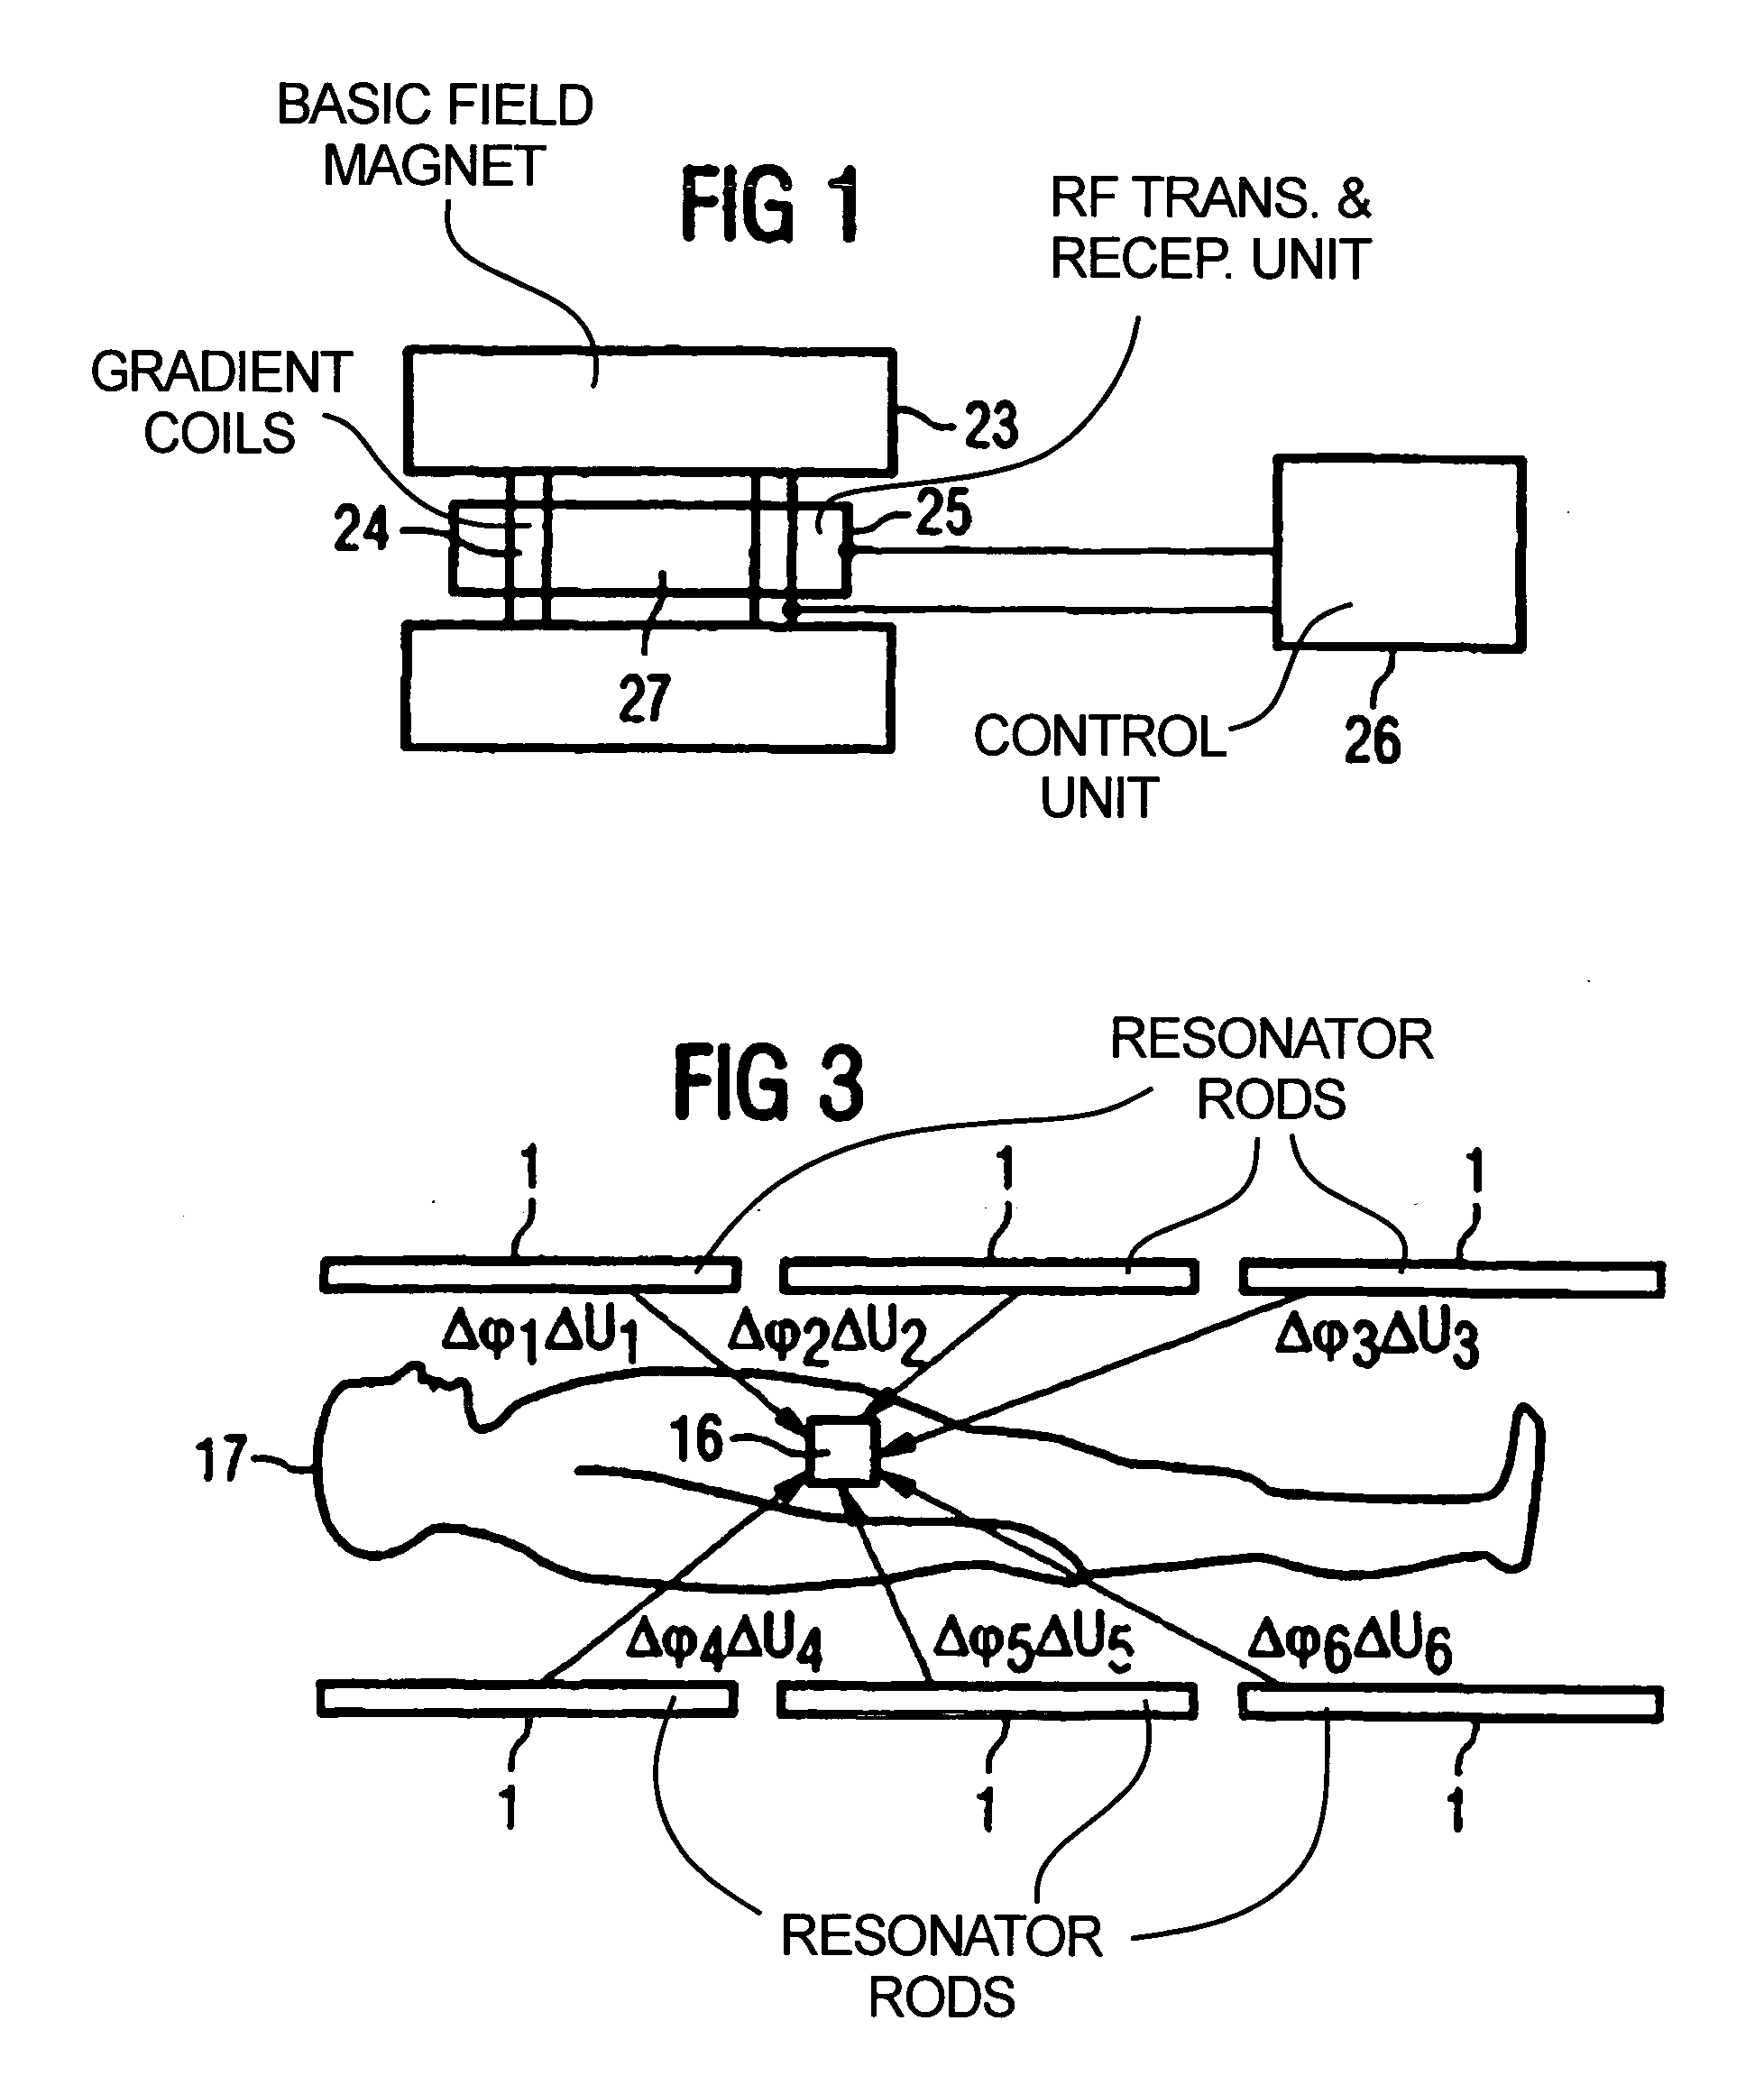 Magnetic resonance apparatus and operation method for hyperthermic treatment